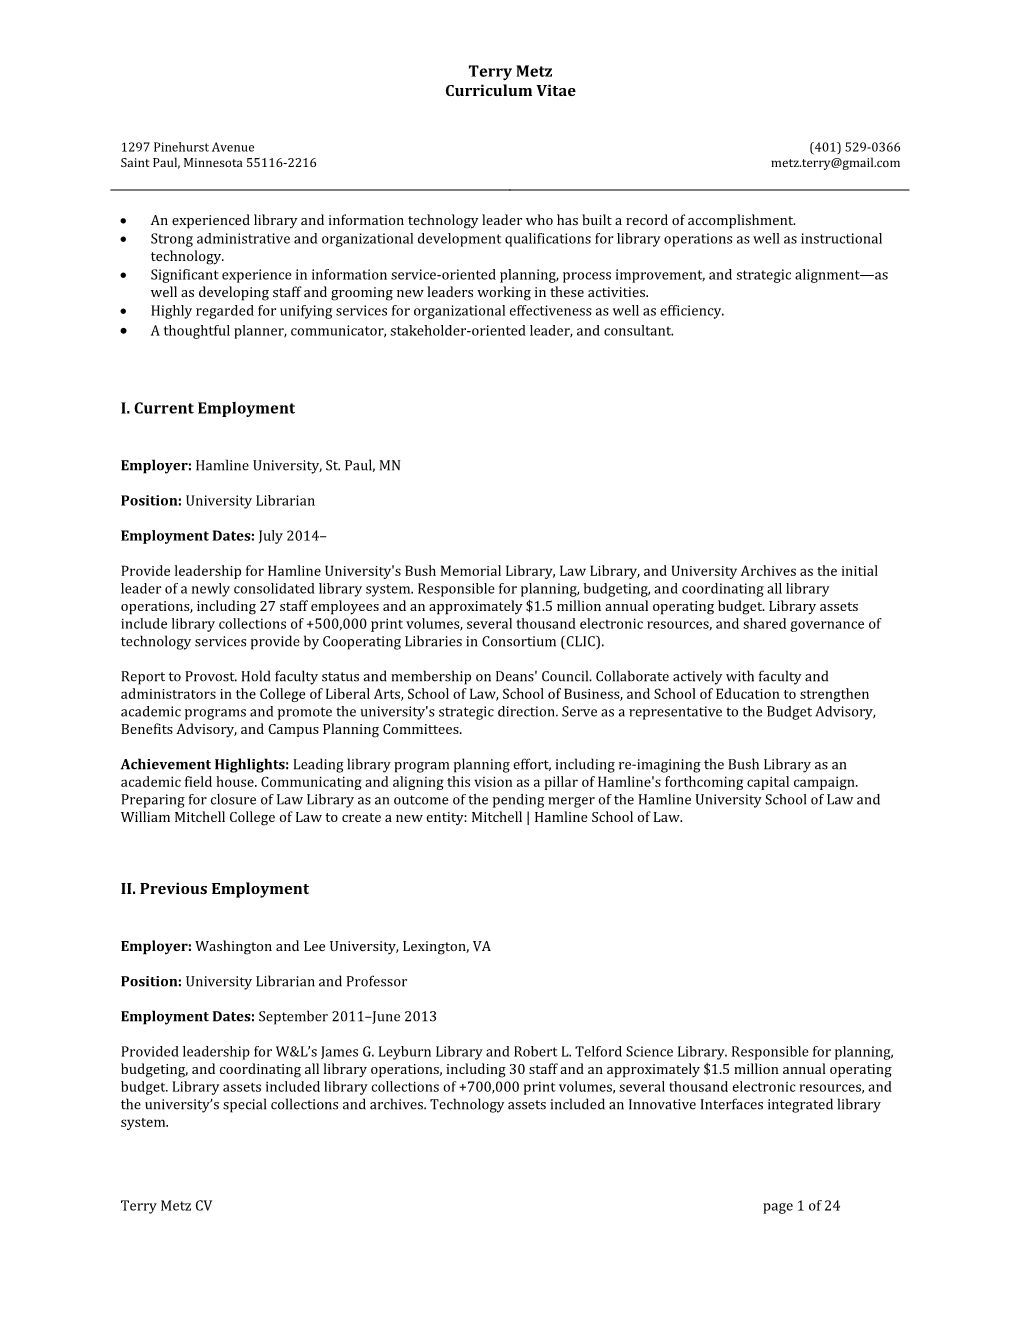 Terry Metz Curriculum Vitae I. Current Employment II. Previous Employment